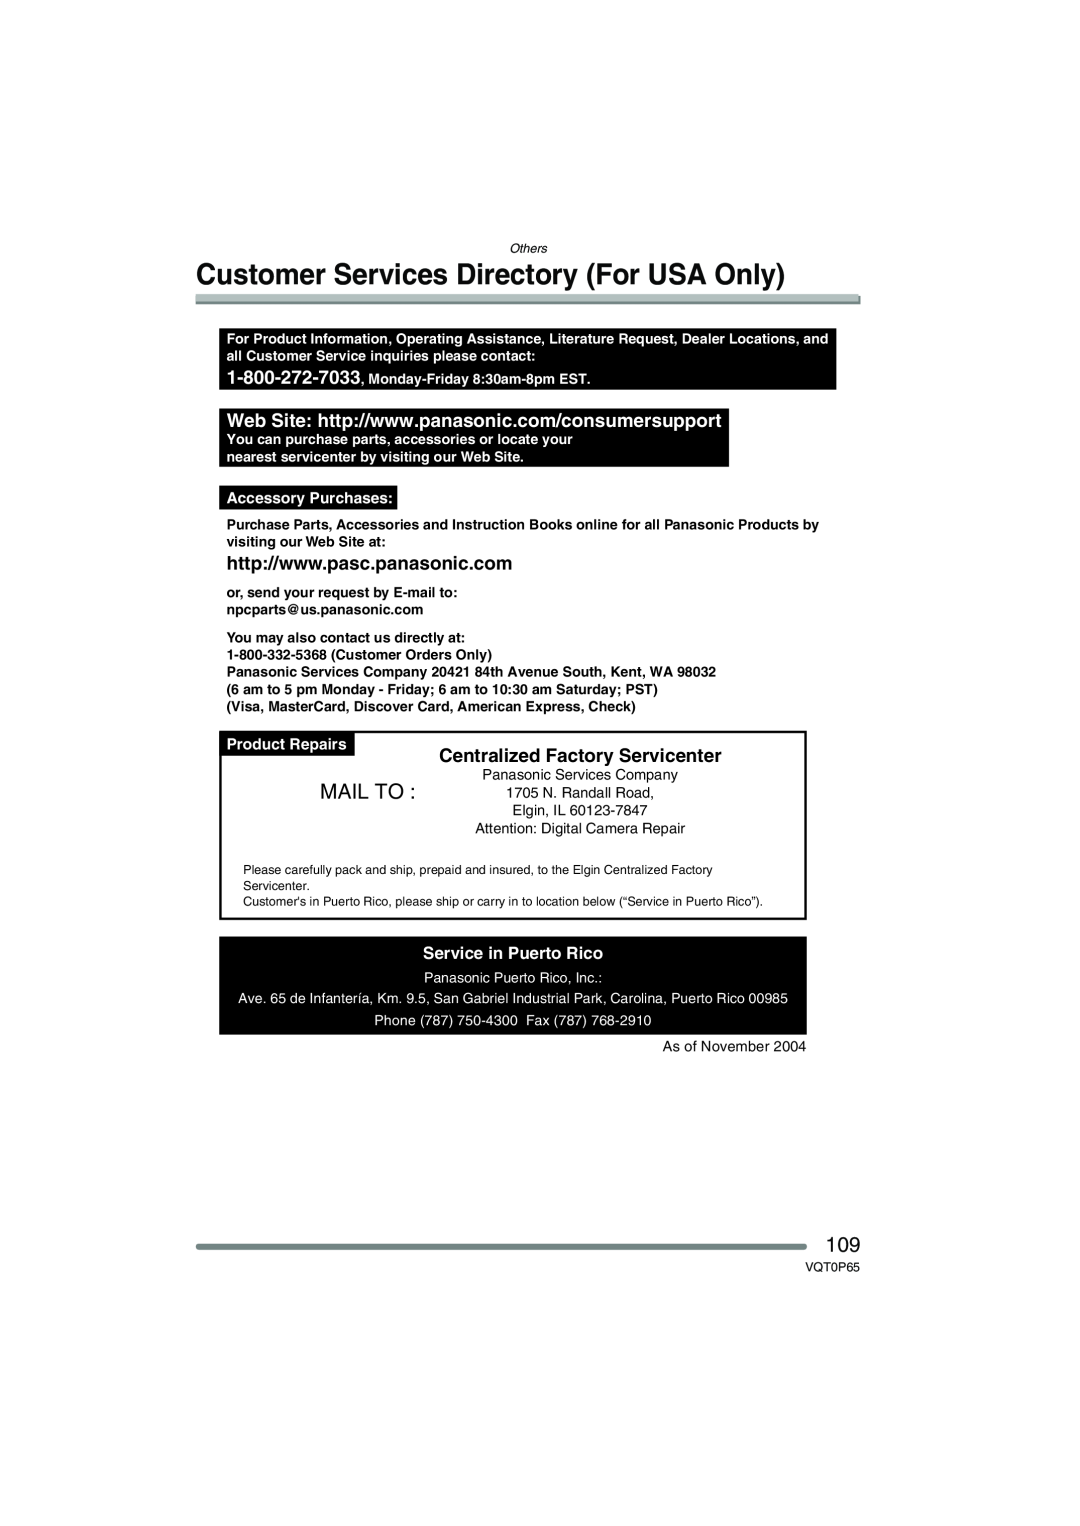 Panasonic DMC-LZ1PP Customer Services Directory For USA Only, Mail To, Centralized Factory Servicenter, Product Repairs 